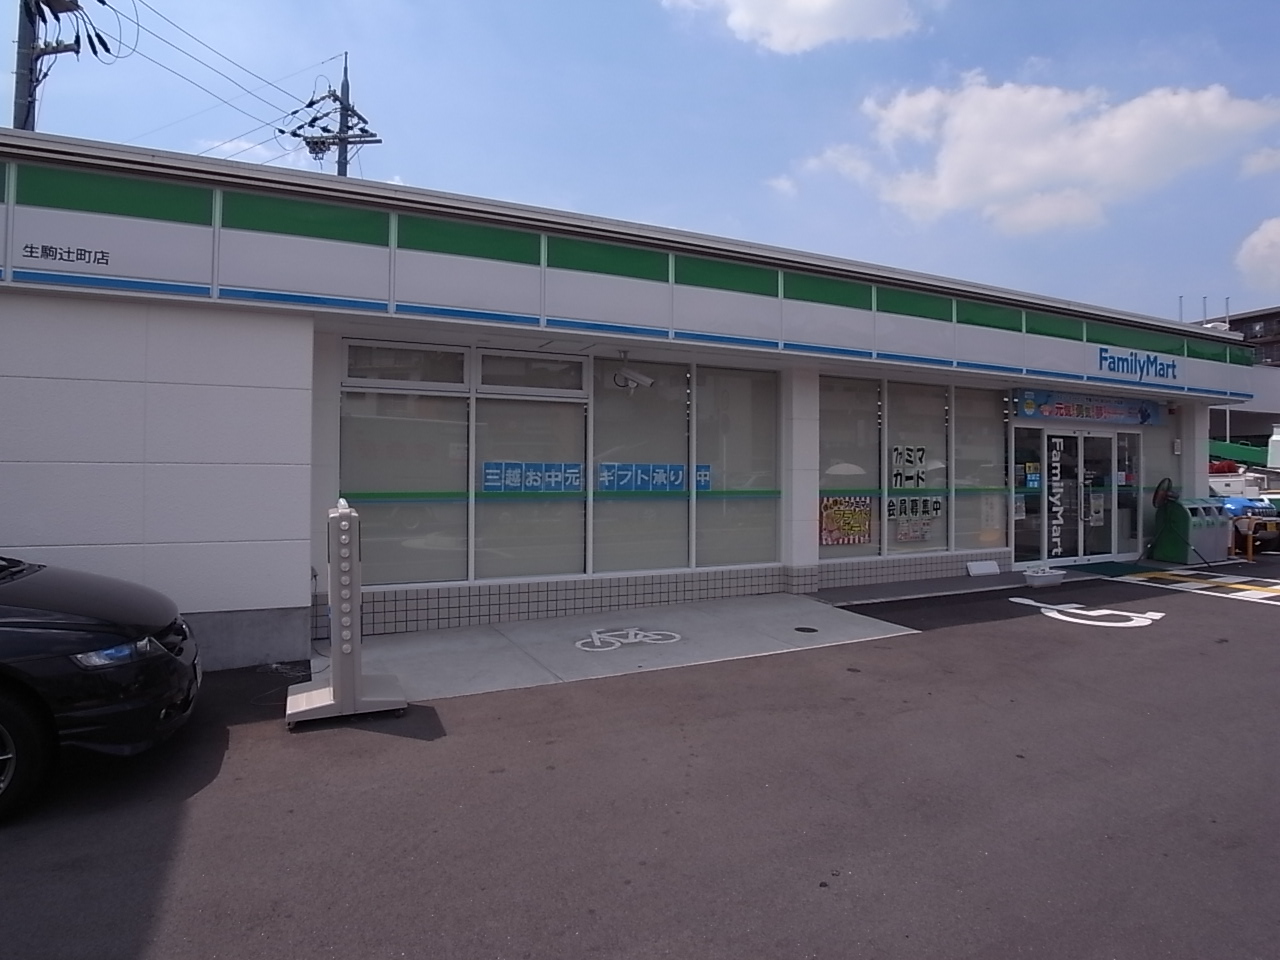 Convenience store. 604m to Family Mart (convenience store)